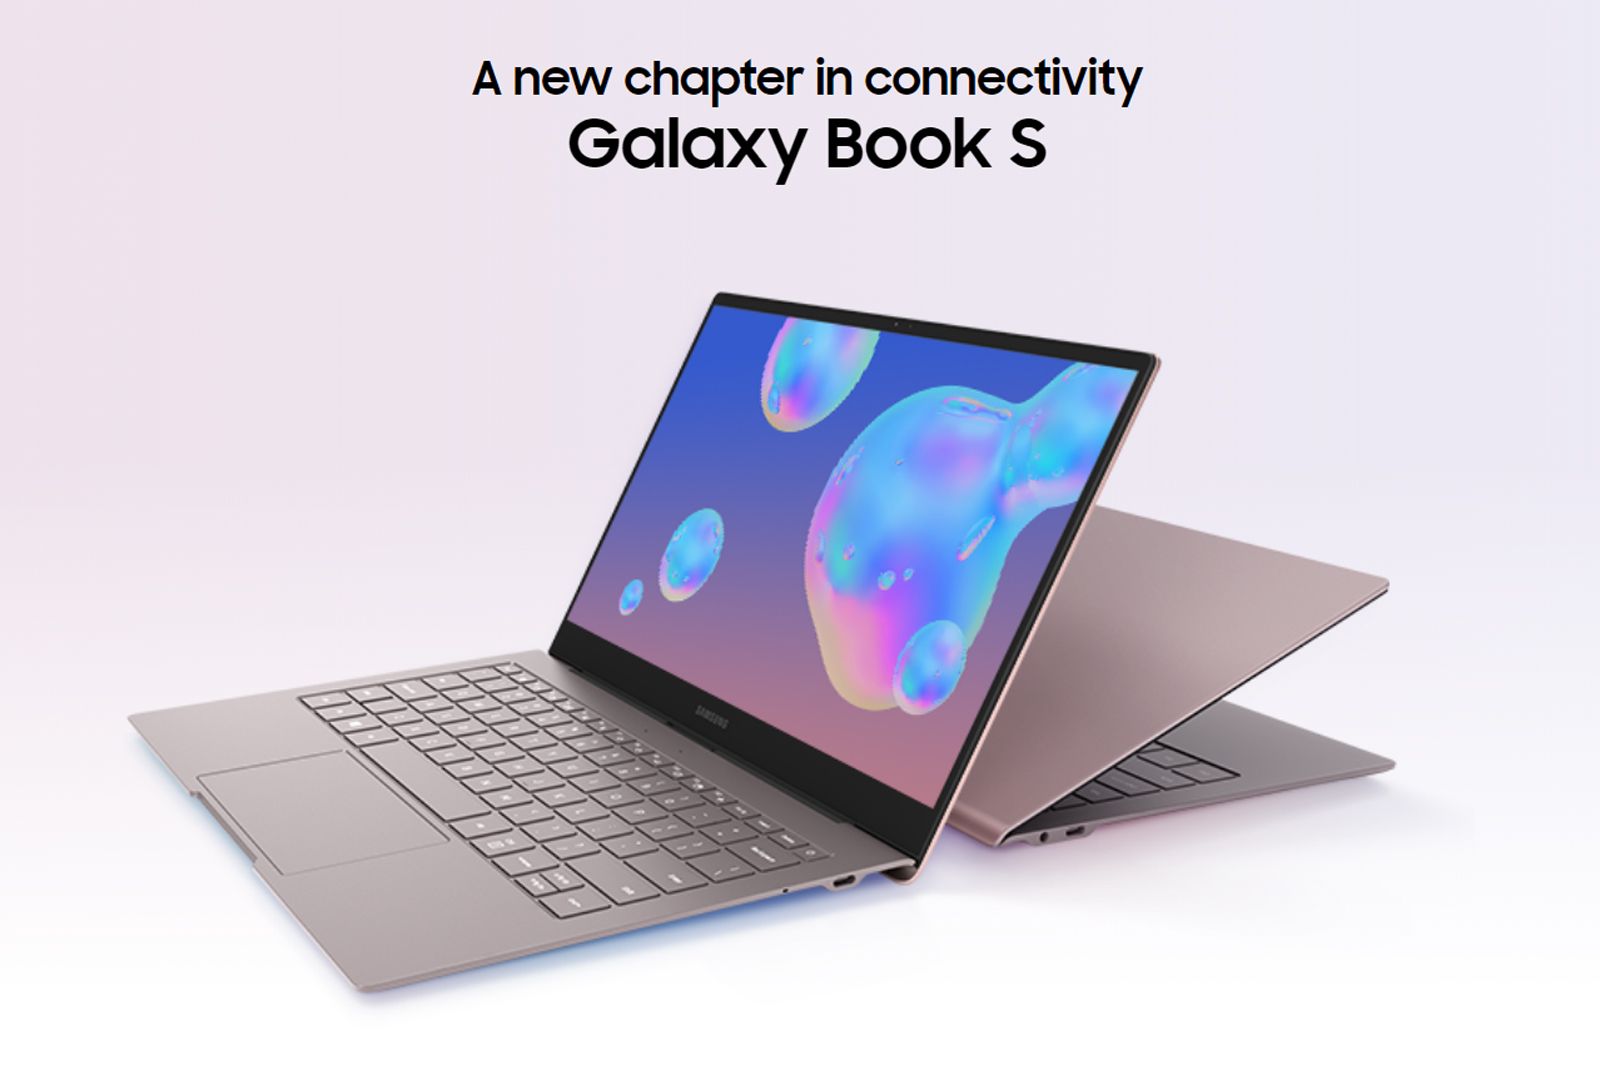 Samsung is making an Intel Lakefield version of the super light Galaxy Book S image 1